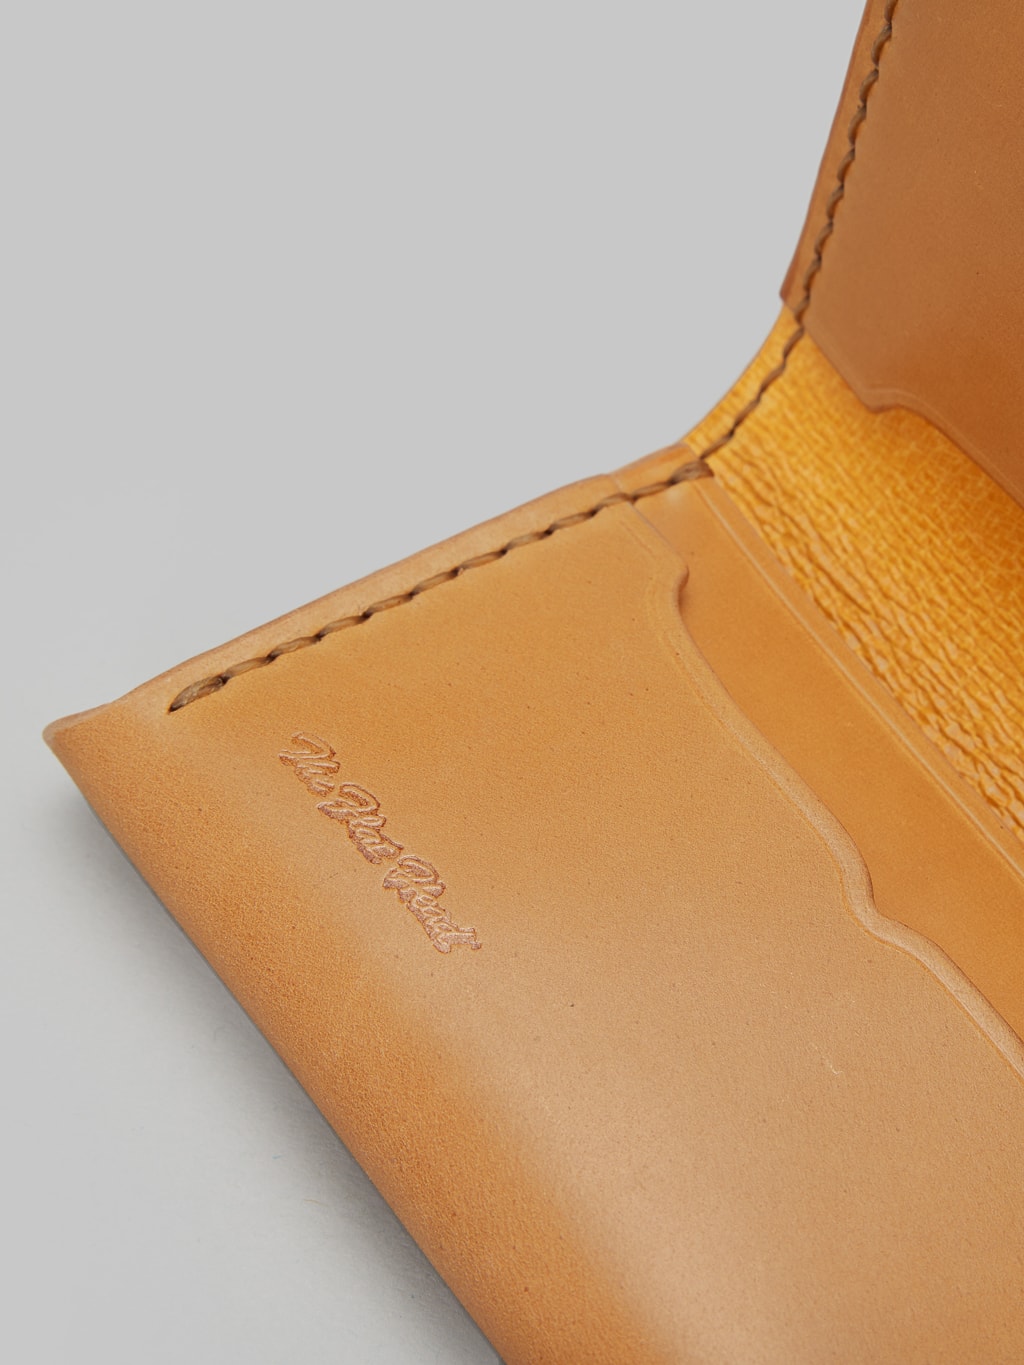 The Flat Head handsewn small cordovan card case camel stamped logo